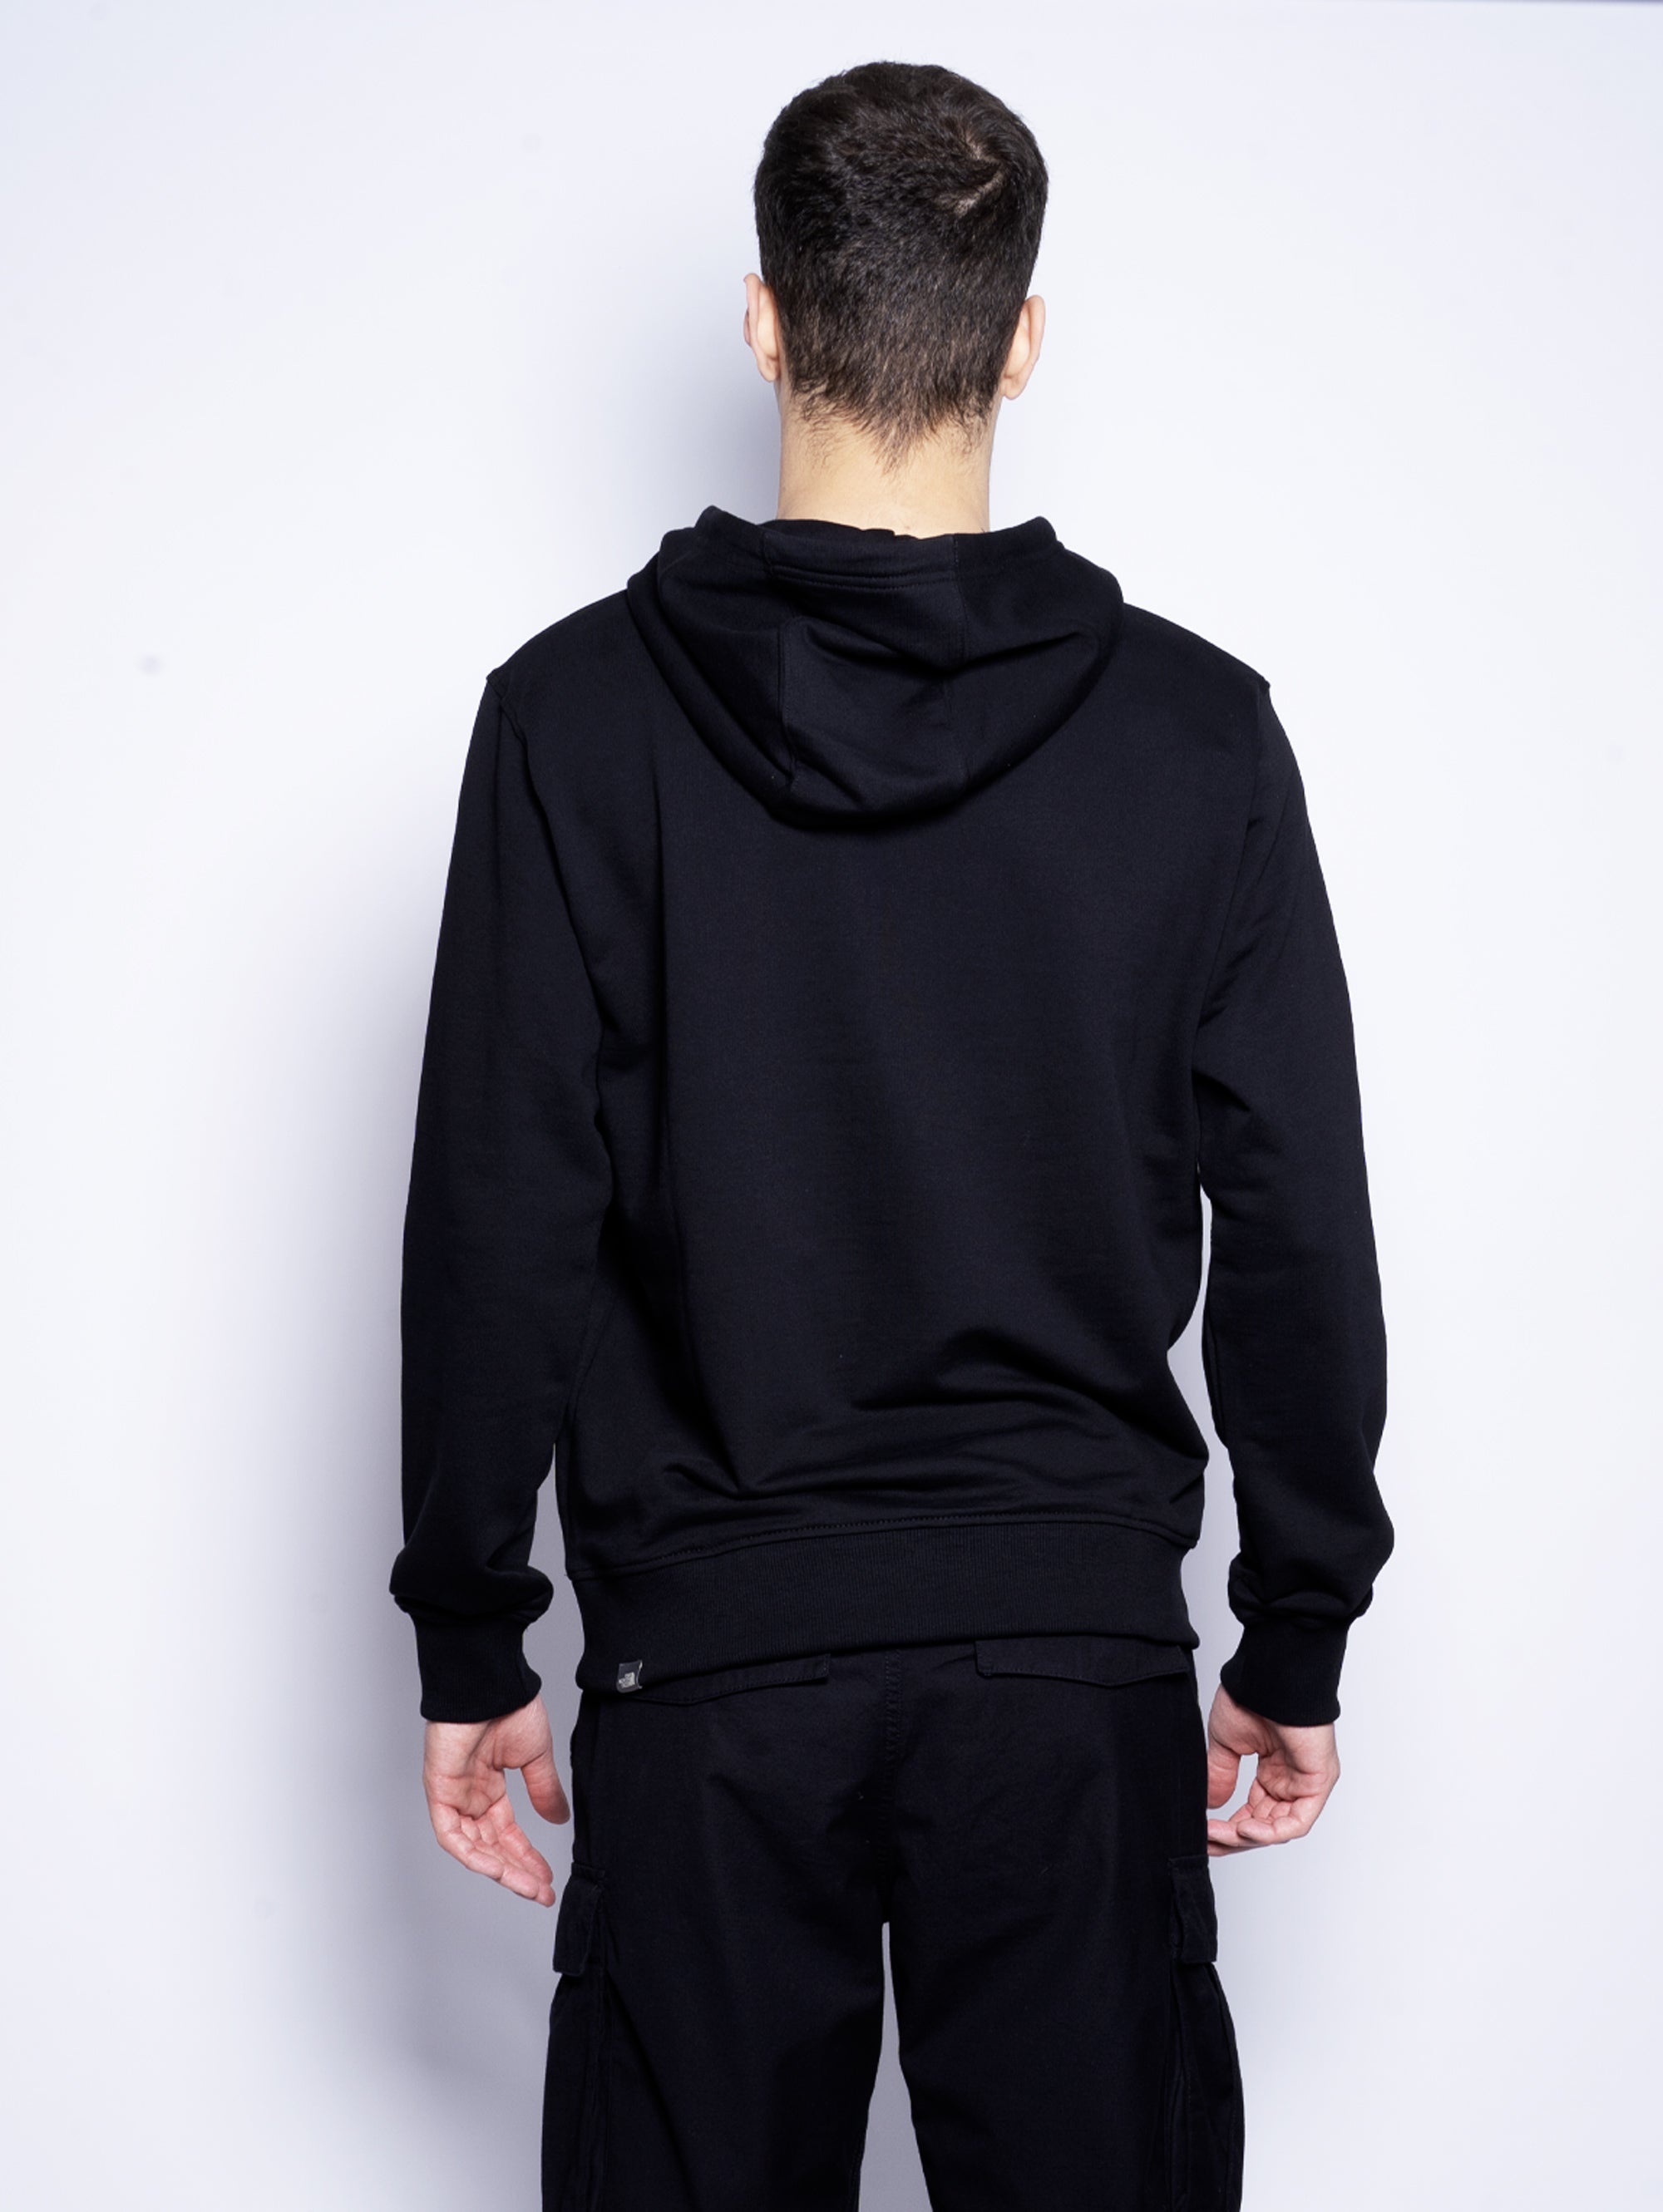 Hooded Sweatshirt with Black Embroidered Logo